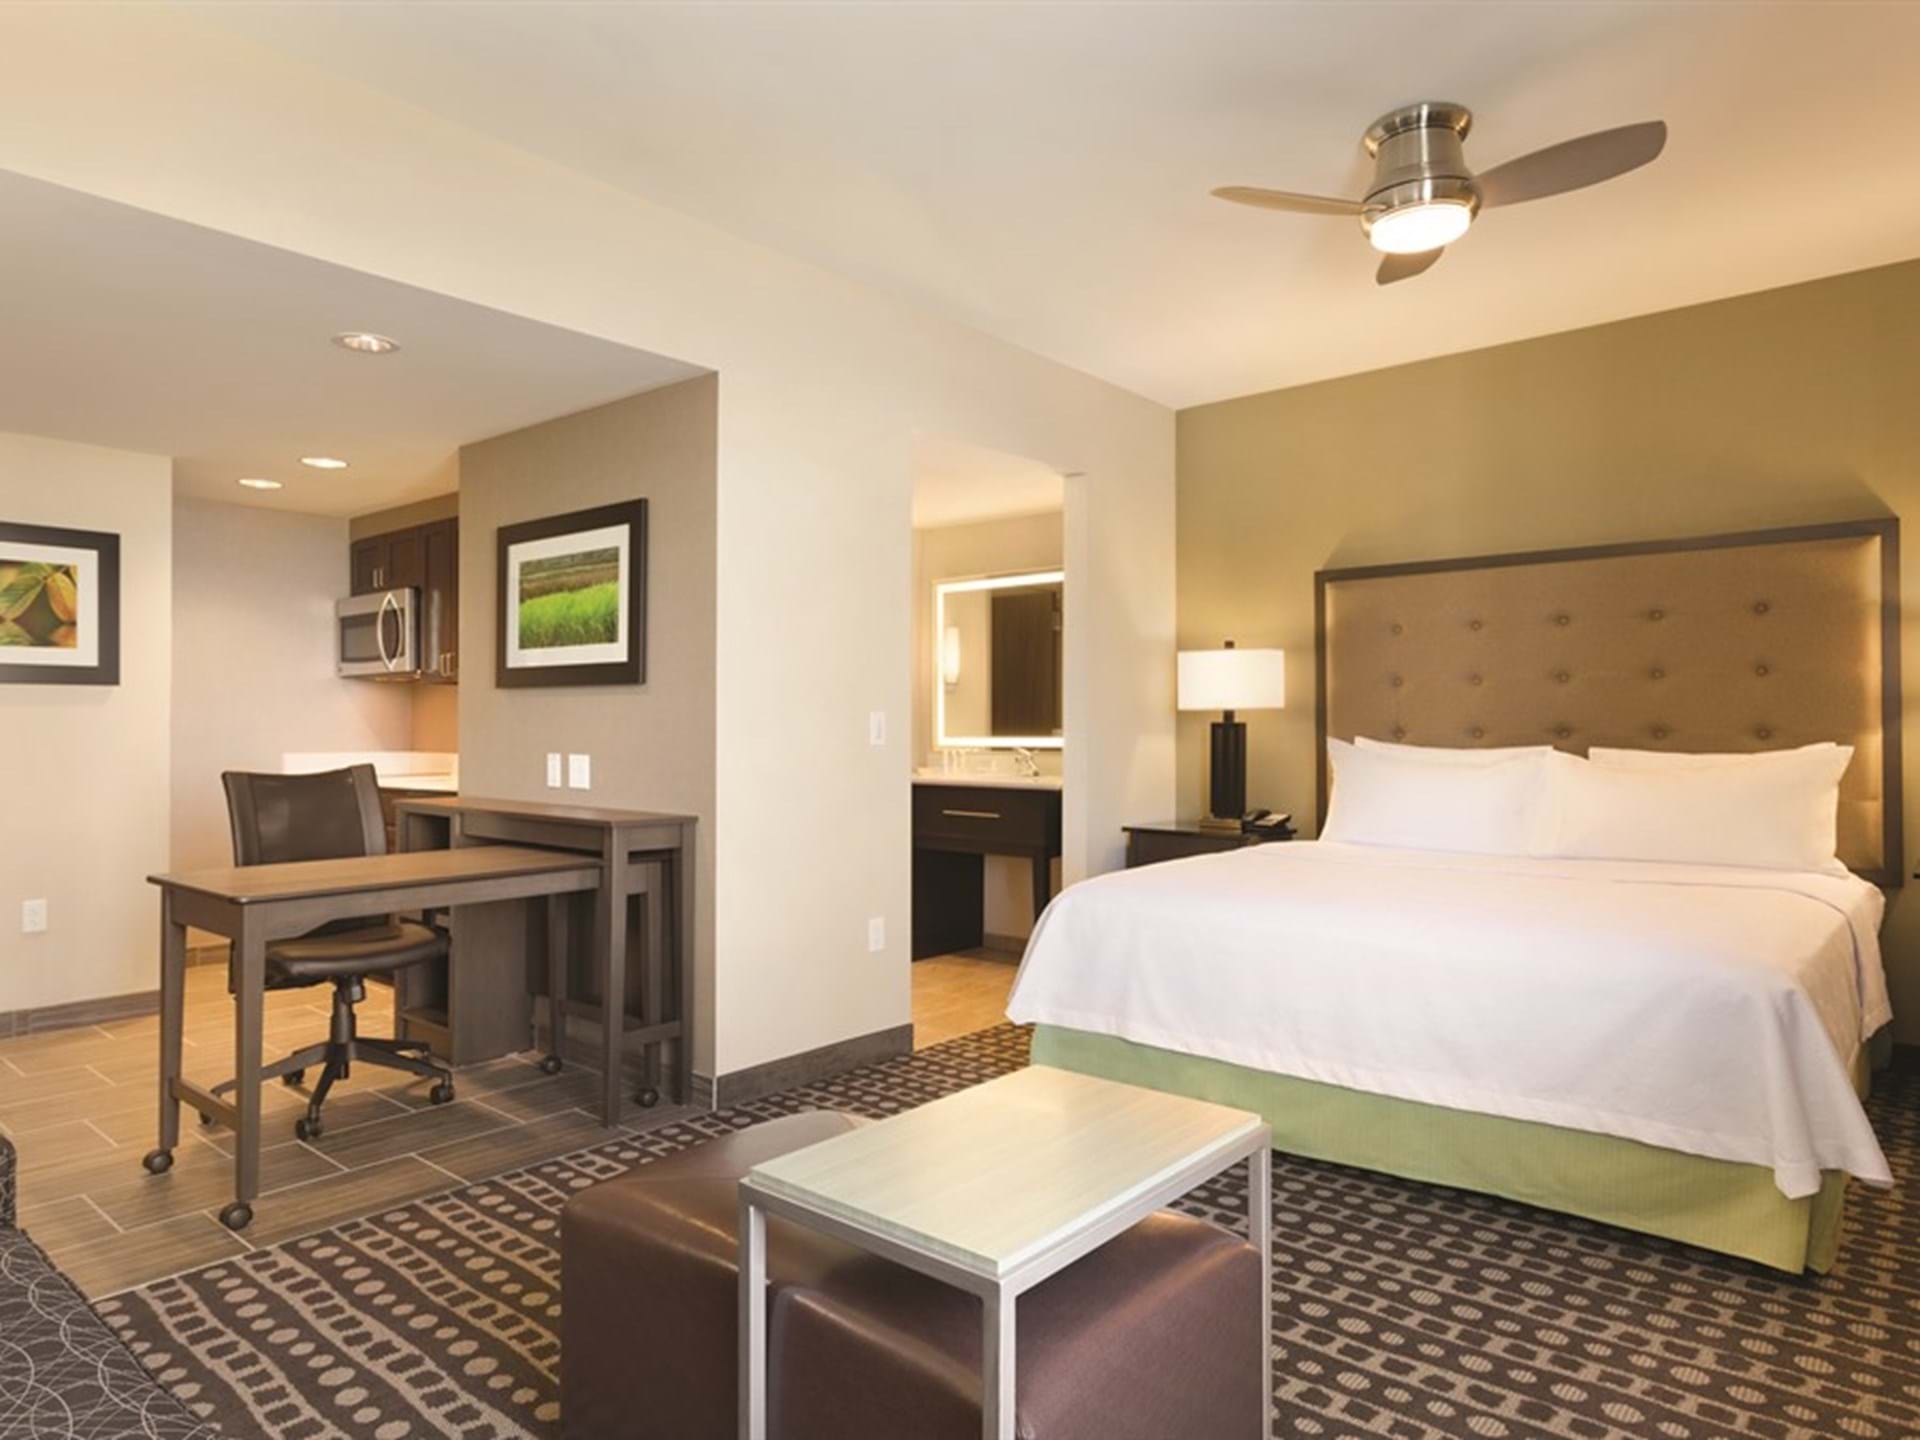 2. Brand new hotel with great guest rooms